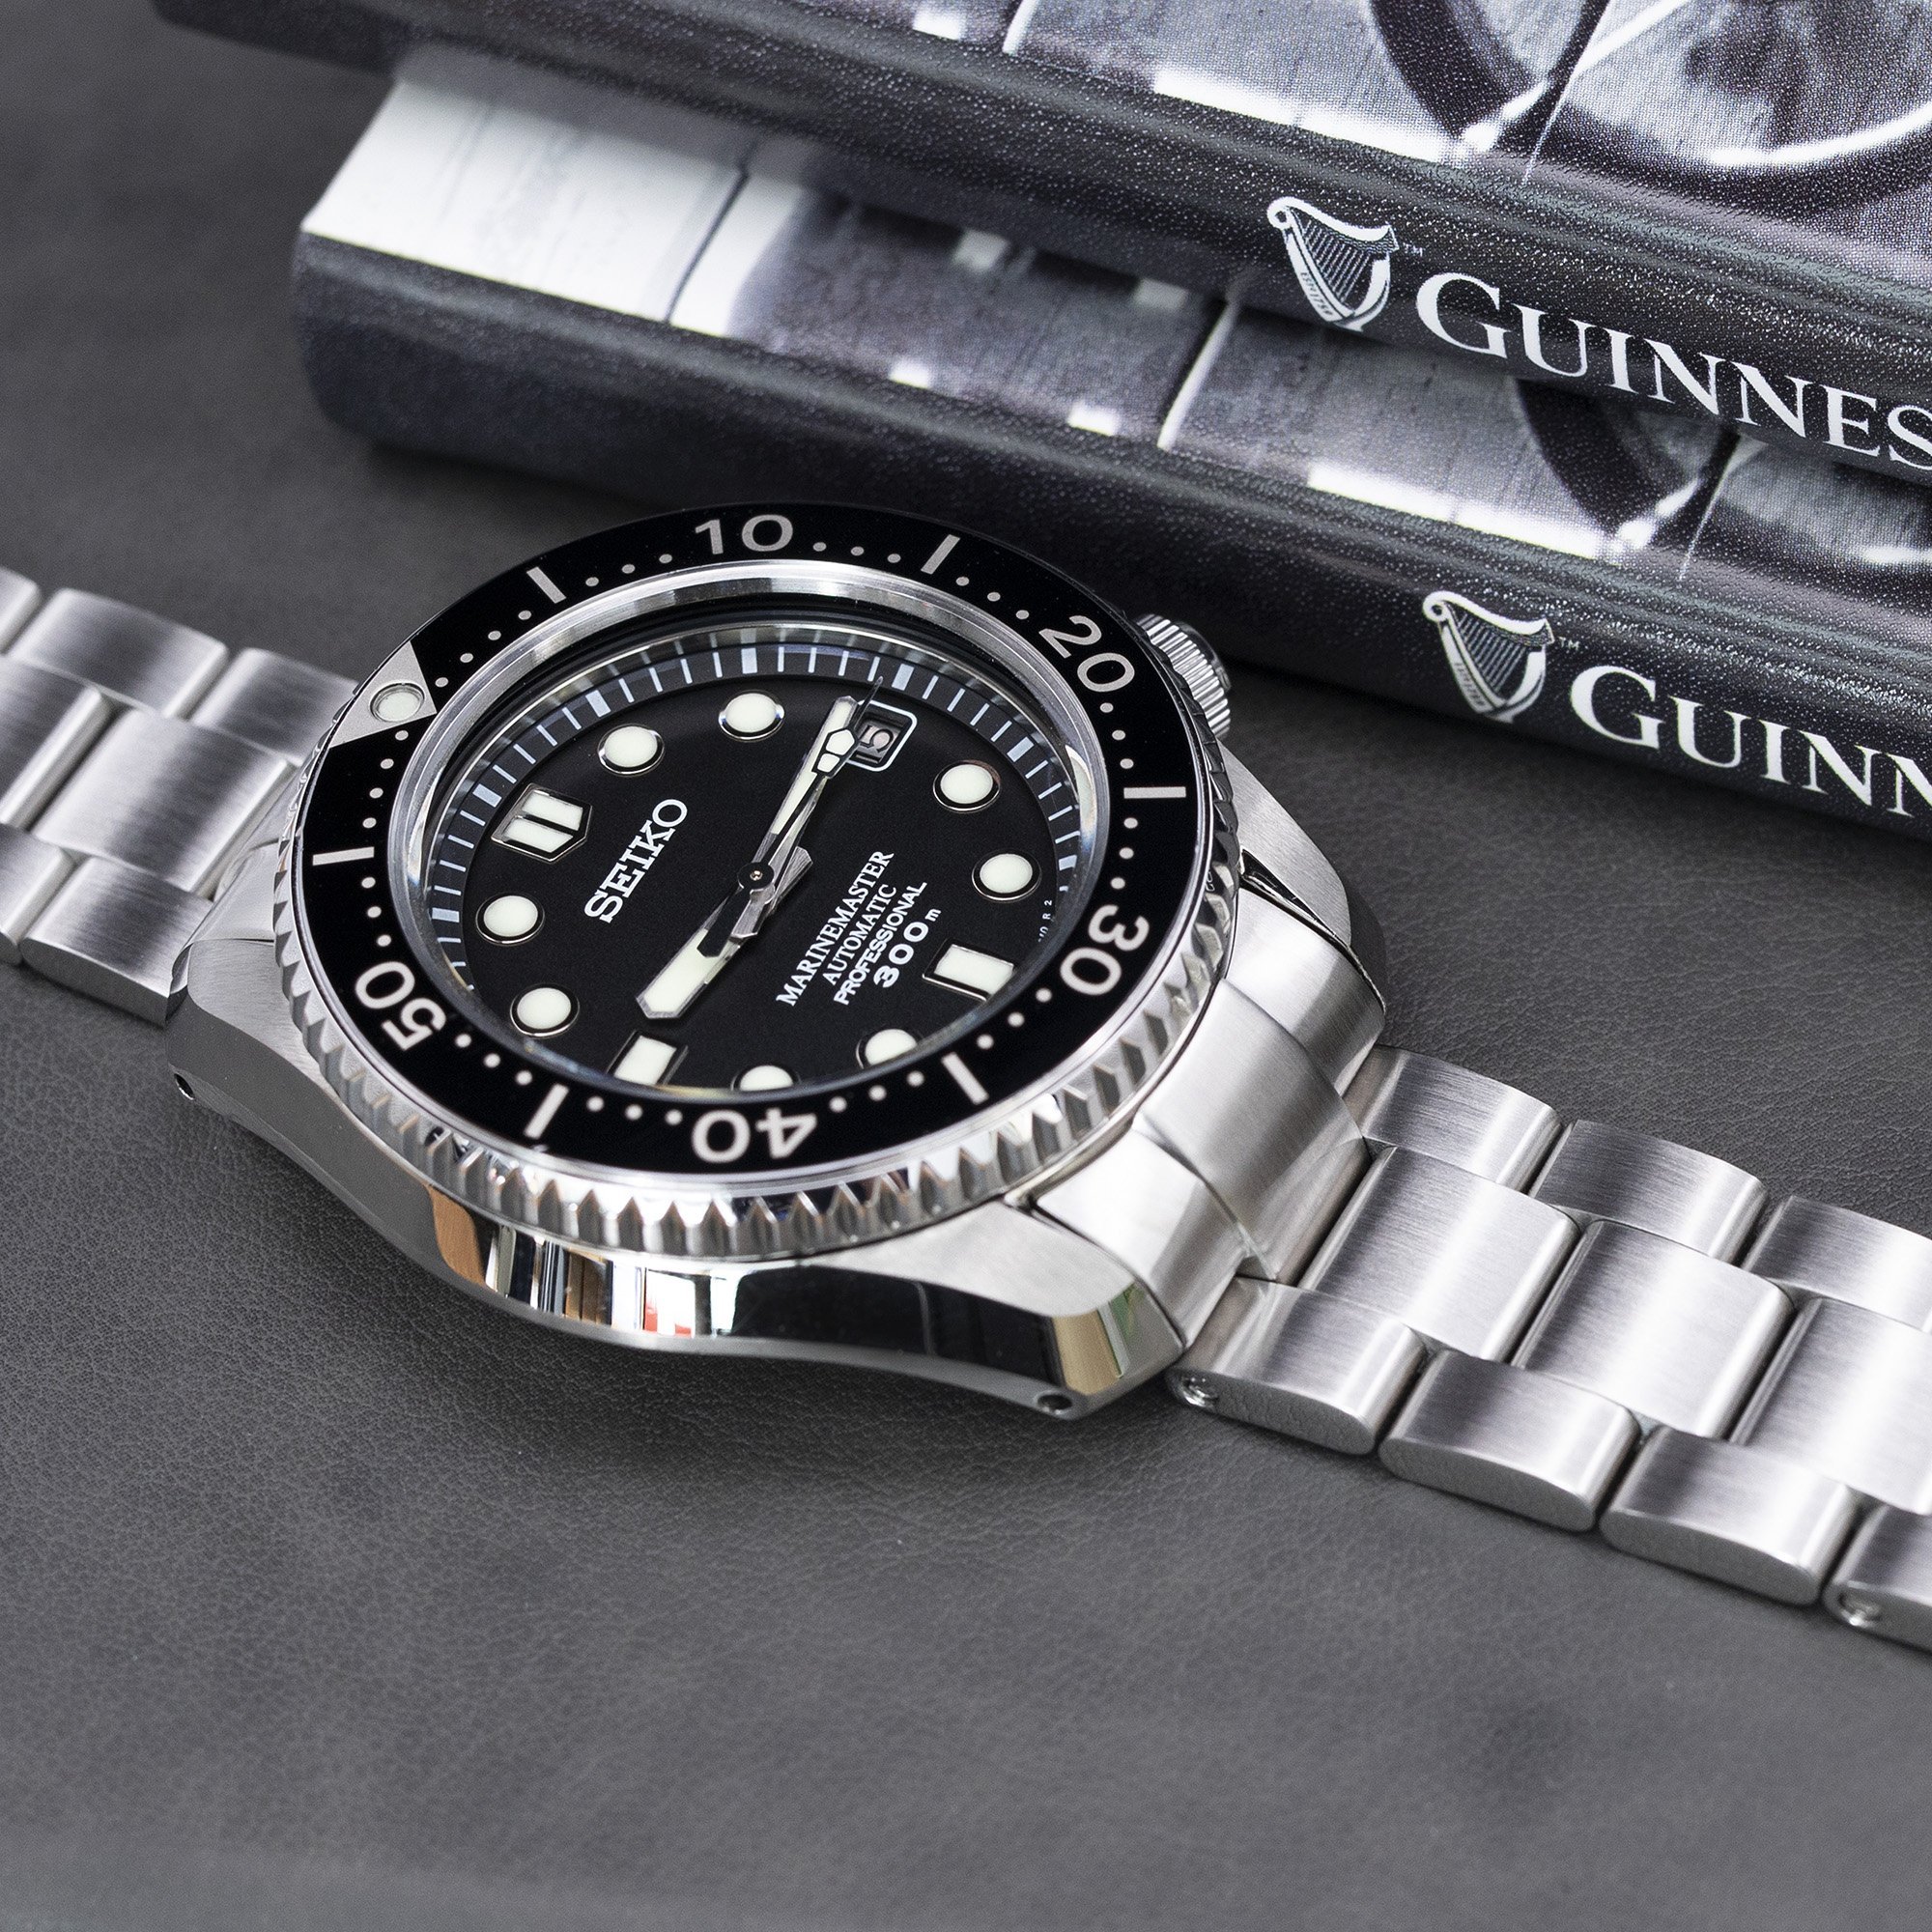 HISTORY OF THE SEIKO MARINEMASTER - Montres Publiques The vintage watch magazine